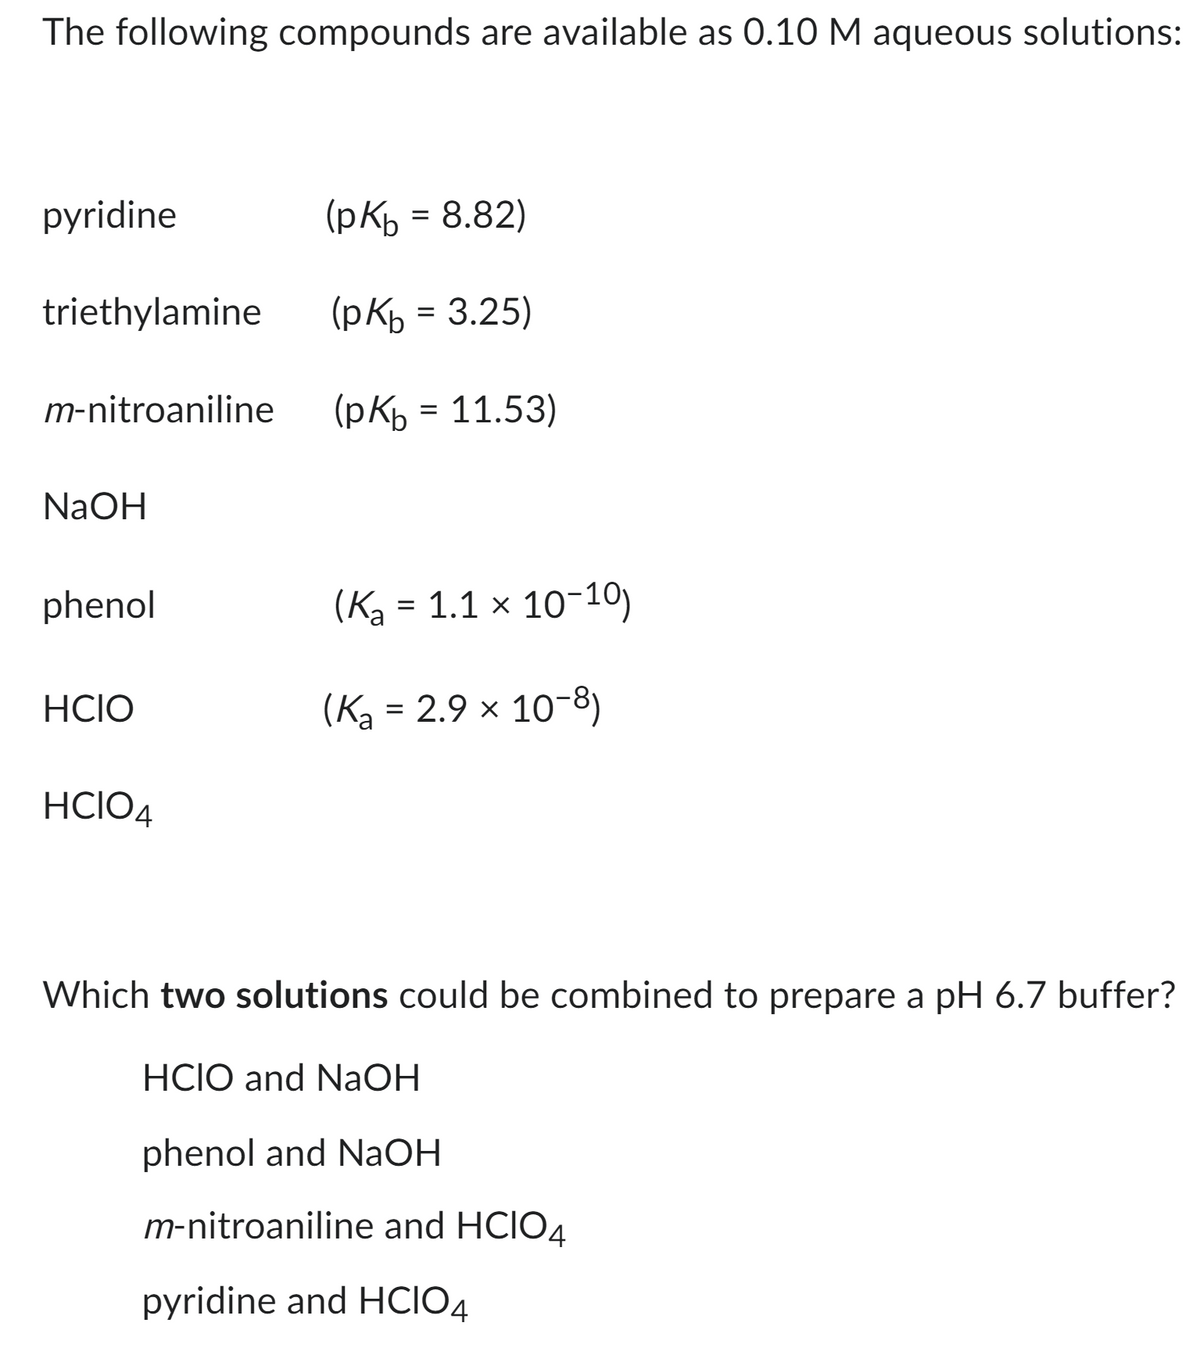 The following compounds are available as 0.10 M aqueous solutions:
pyridine
triethylamine
m-nitroaniline
NaOH
phenol
HCIO
HCIO4
(рКь = 8.82)
(pKb = 3.25)
(pKb = 11.53)
(K₂ = 1.1 × 10-10)
(K₂ = 2.9 × 10-8)
Which two solutions could be combined to prepare a pH 6.7 buffer?
HCIO and NaOH
phenol and NaOH
m-nitroaniline and HCIO4
pyridine and HCIO4